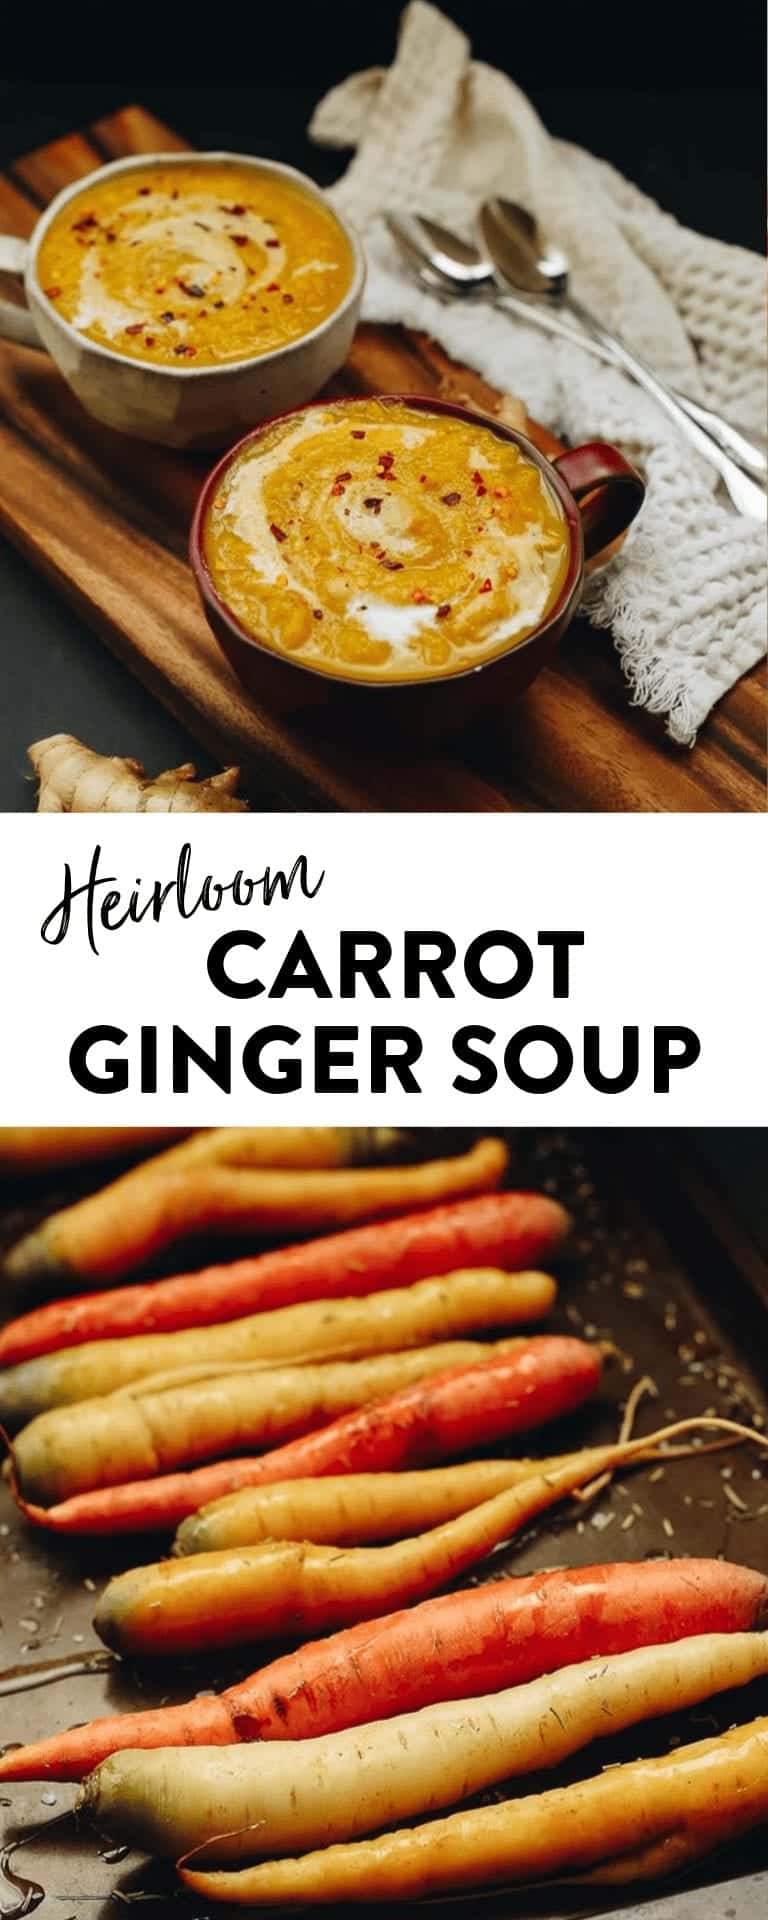 Healthy carrot ginger soup made with freshly roasted heirloom carrots and a spicy zest of ginger for a perfect fall meal